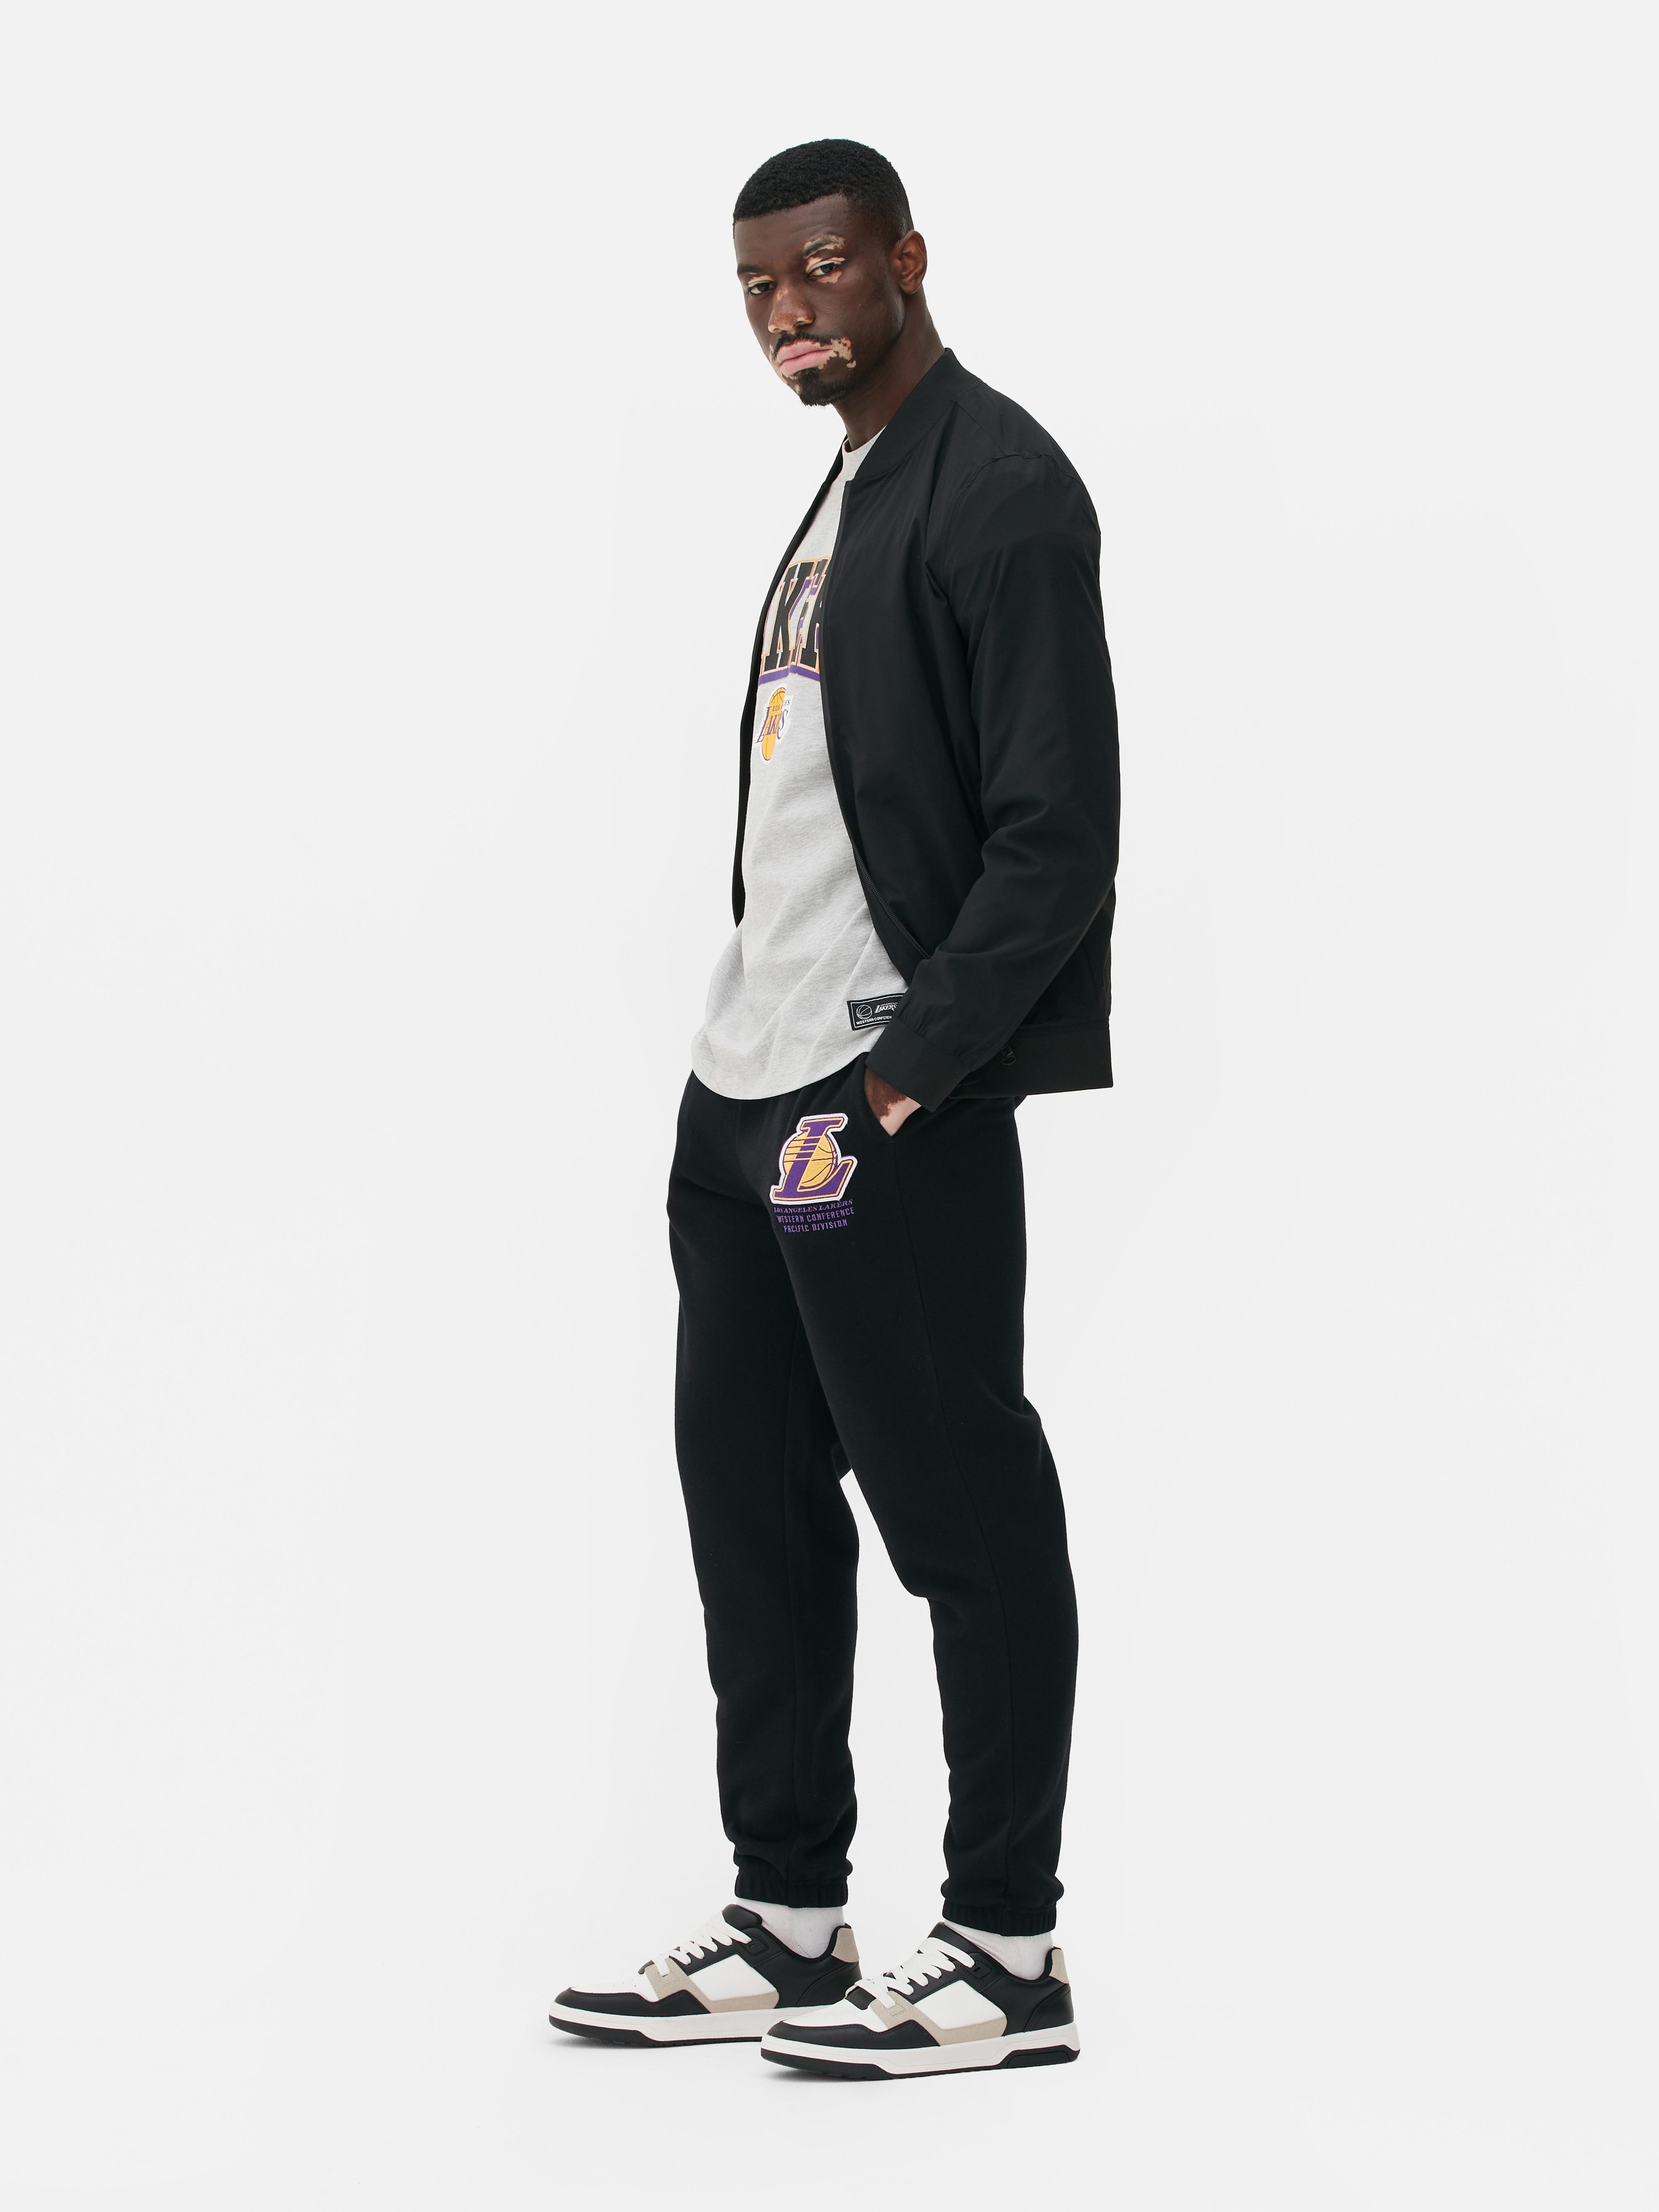 lakers outfit mens